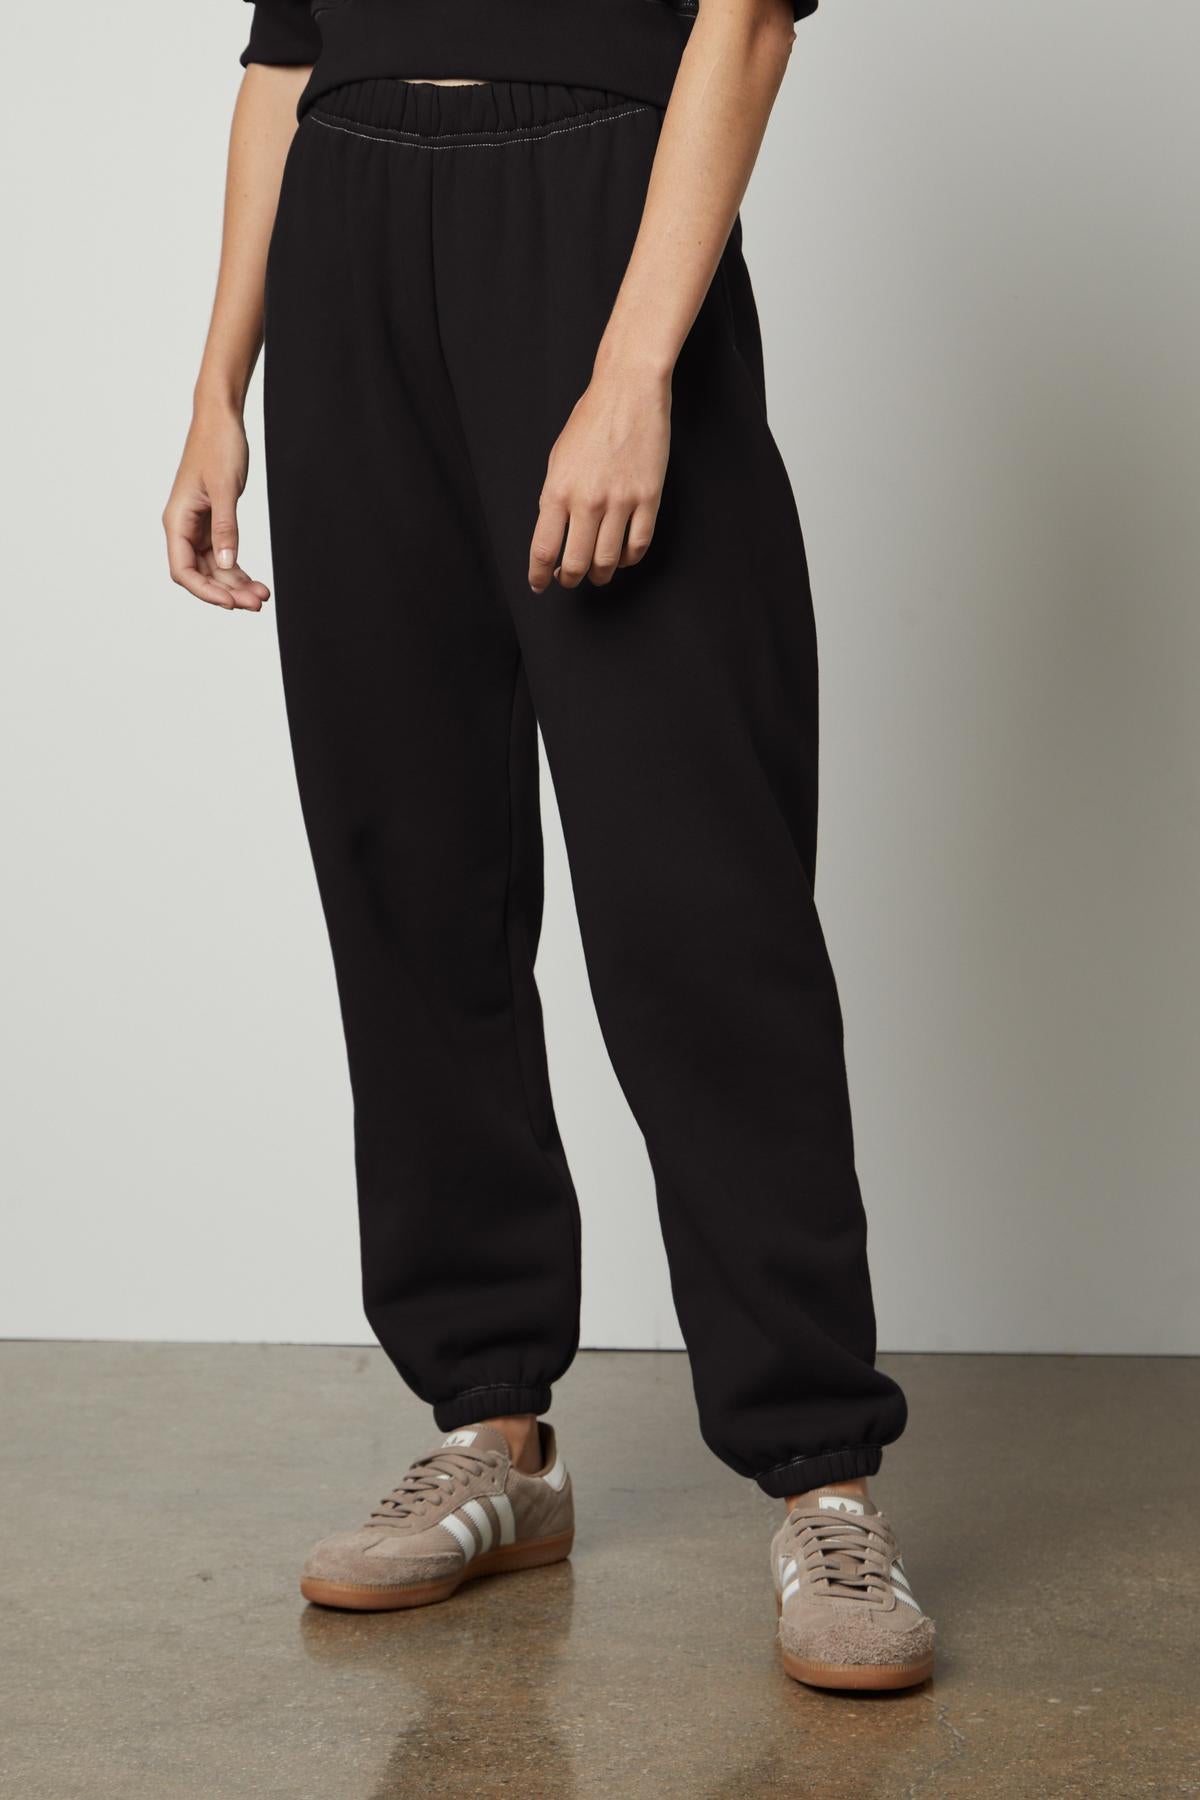 A woman seeking comfort and warmth in Velvet by Graham & Spencer CELESTA SWEATPANT and a cozy sweater.-35678661181633